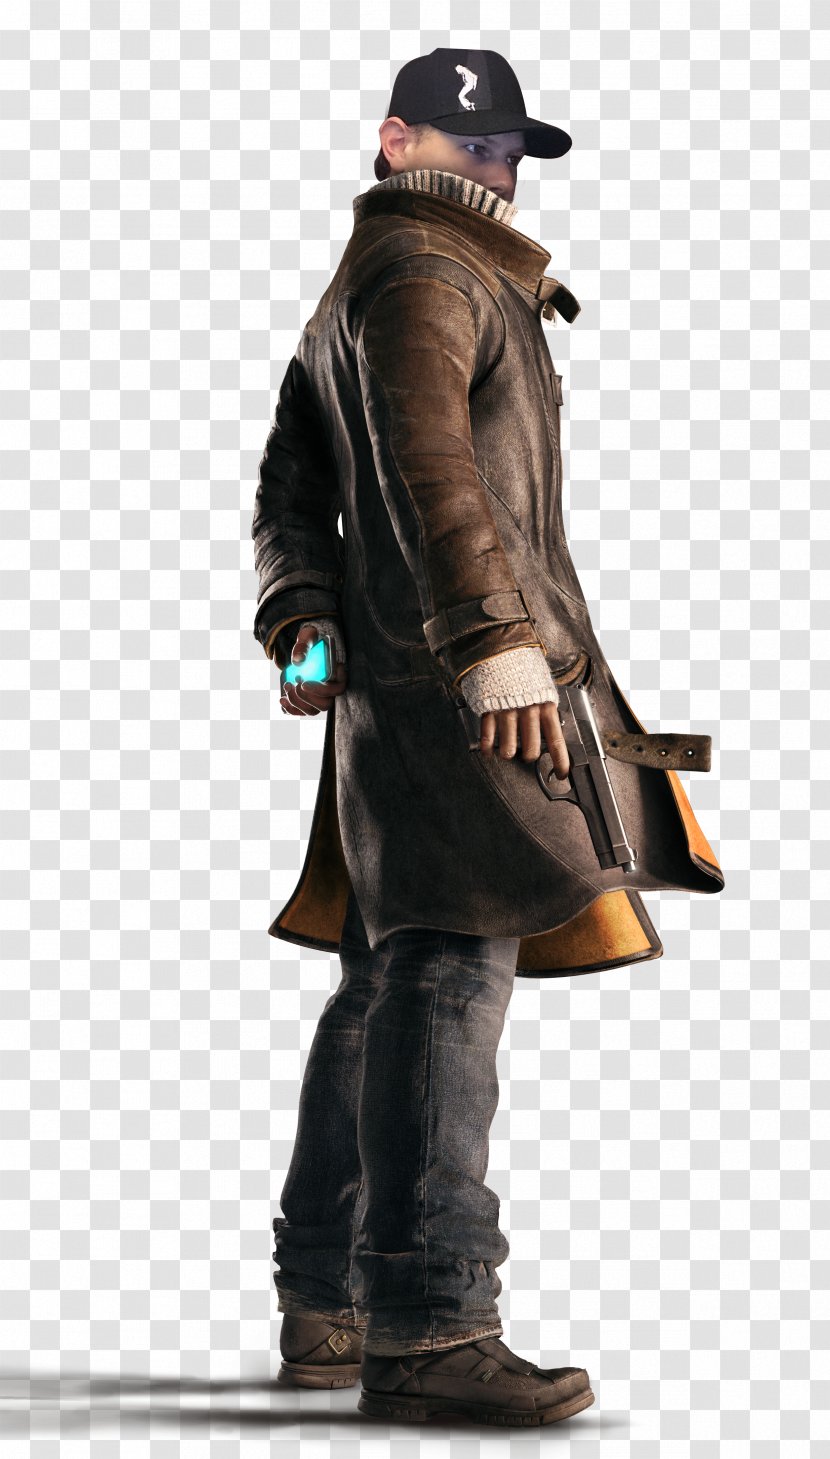 Watch Dogs 2 Aiden Pearce Security Hacker Cosplay Transparent PNG